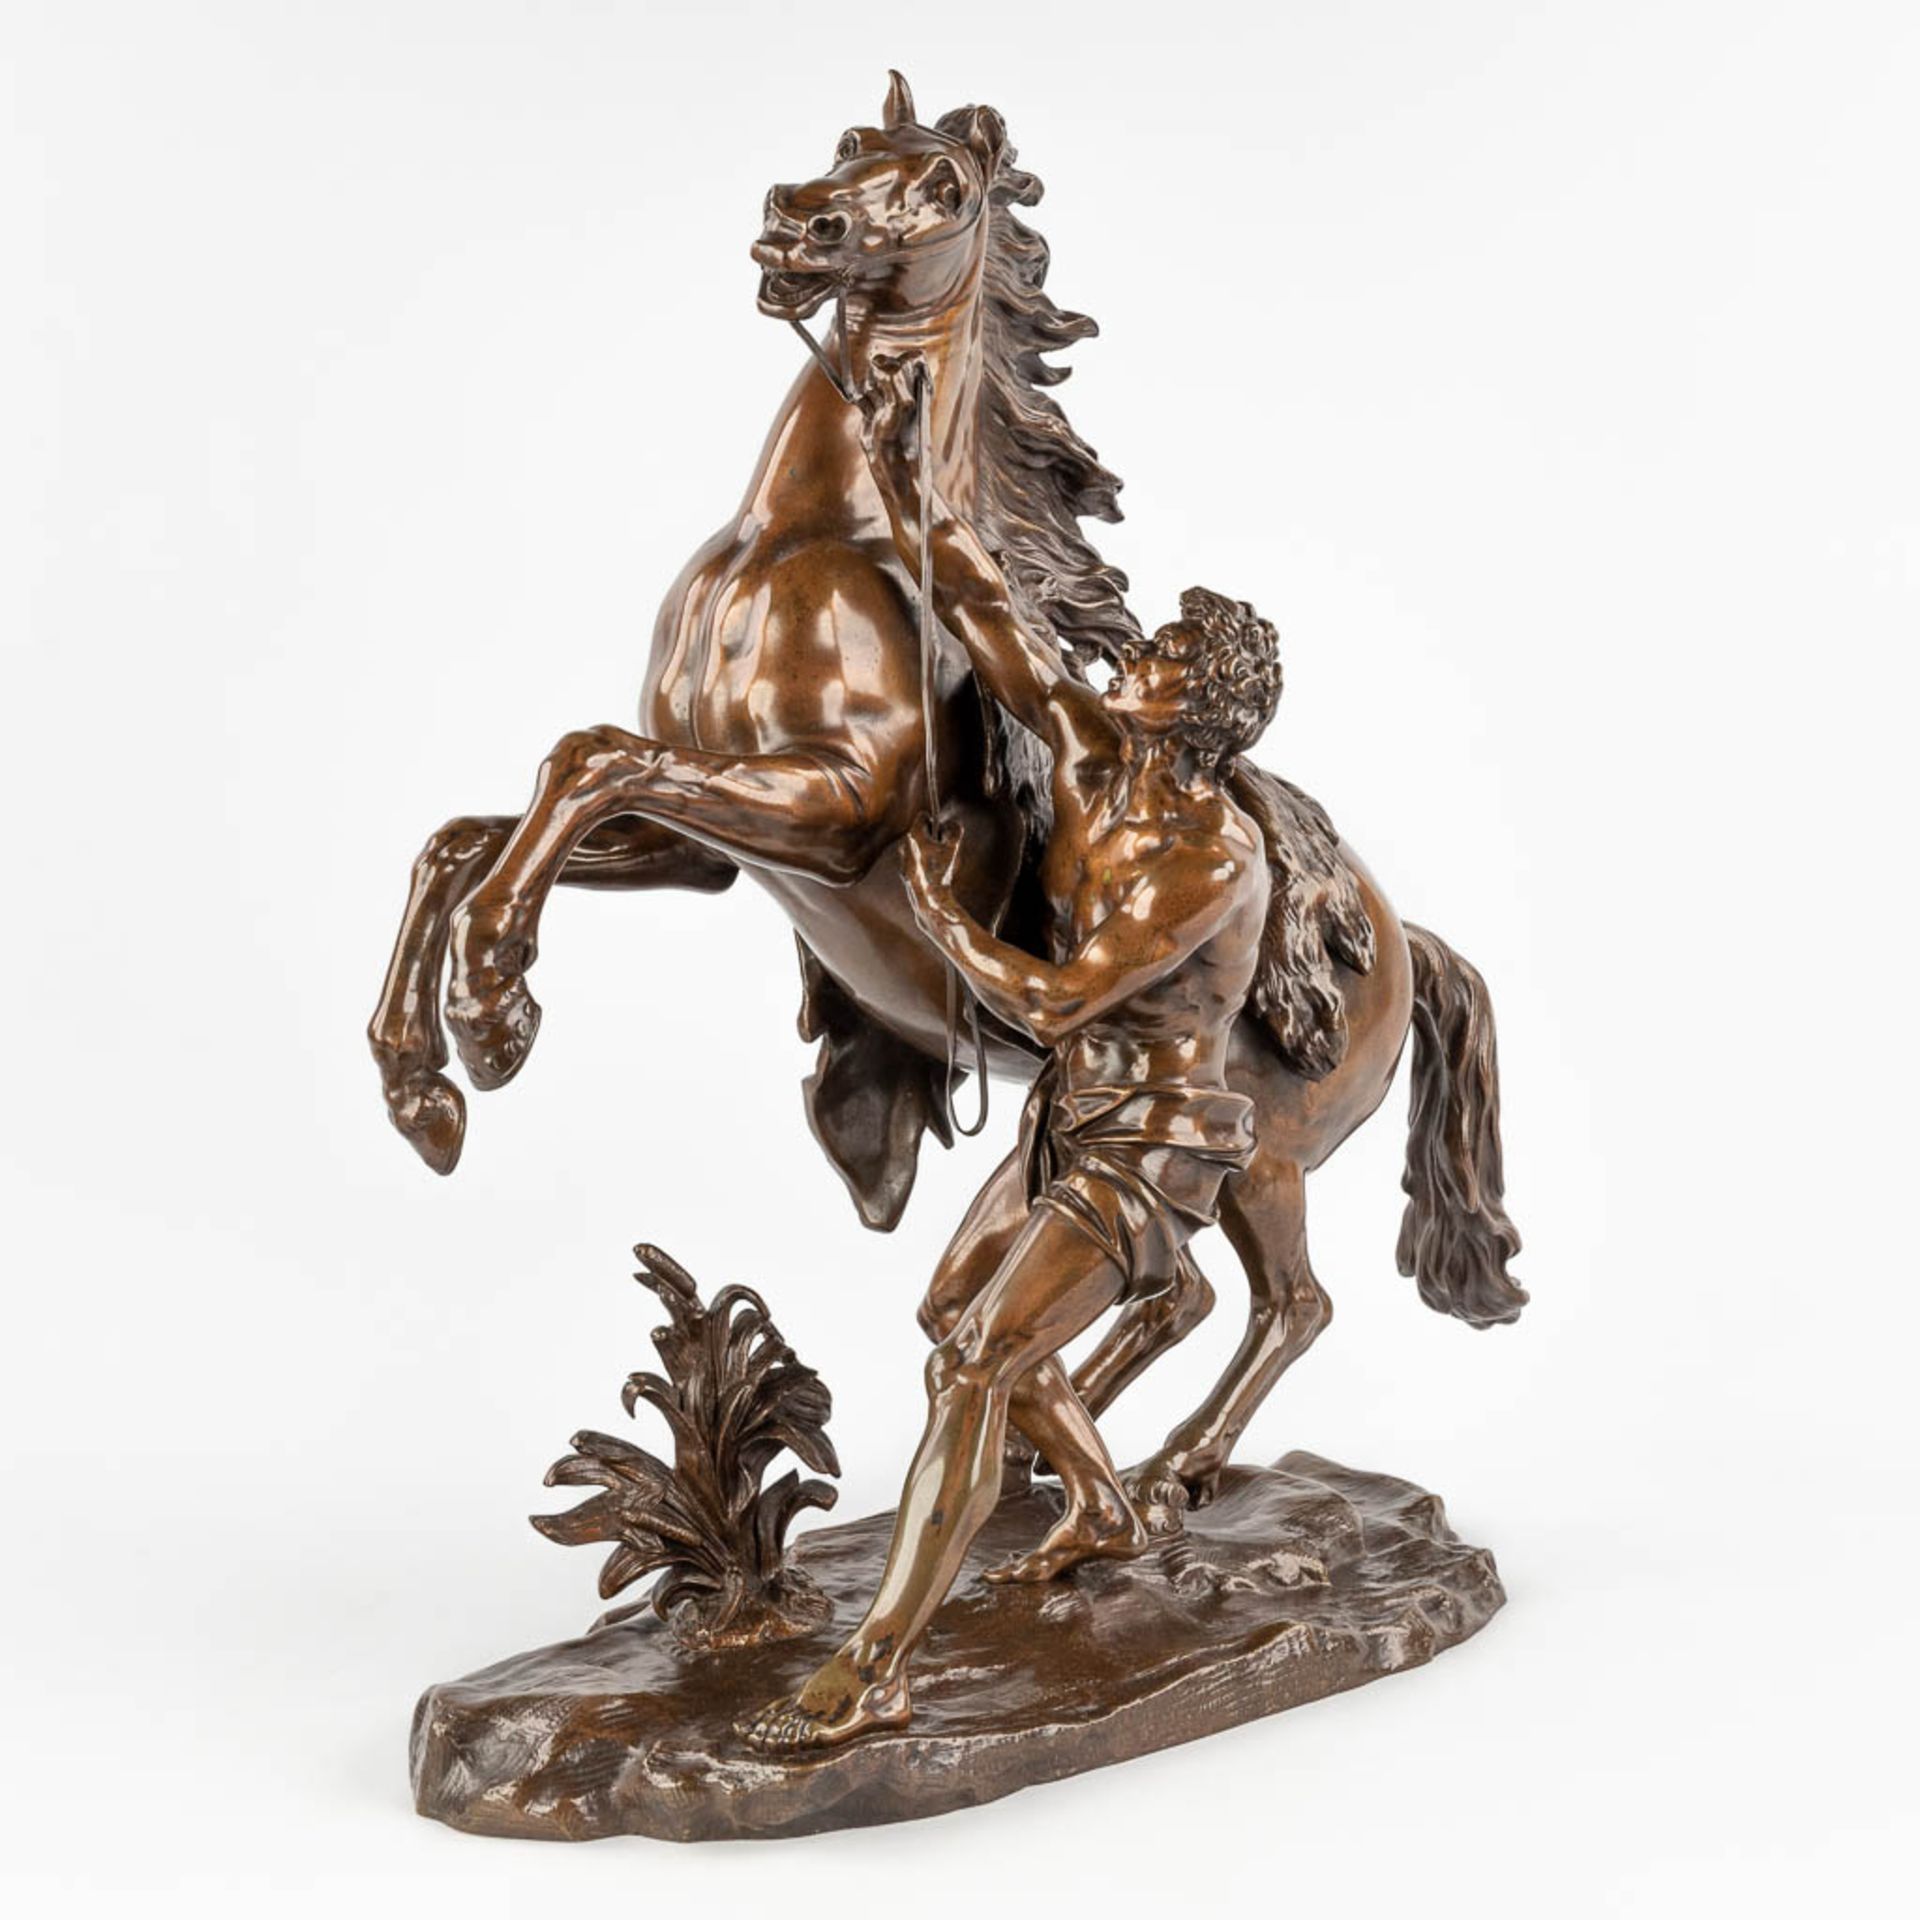 Guillaume I COUSTOU (1677-1746)(after), 'Marly horse' patinated bronze. (D:26 x W:56 x H:58 cm) - Image 3 of 12